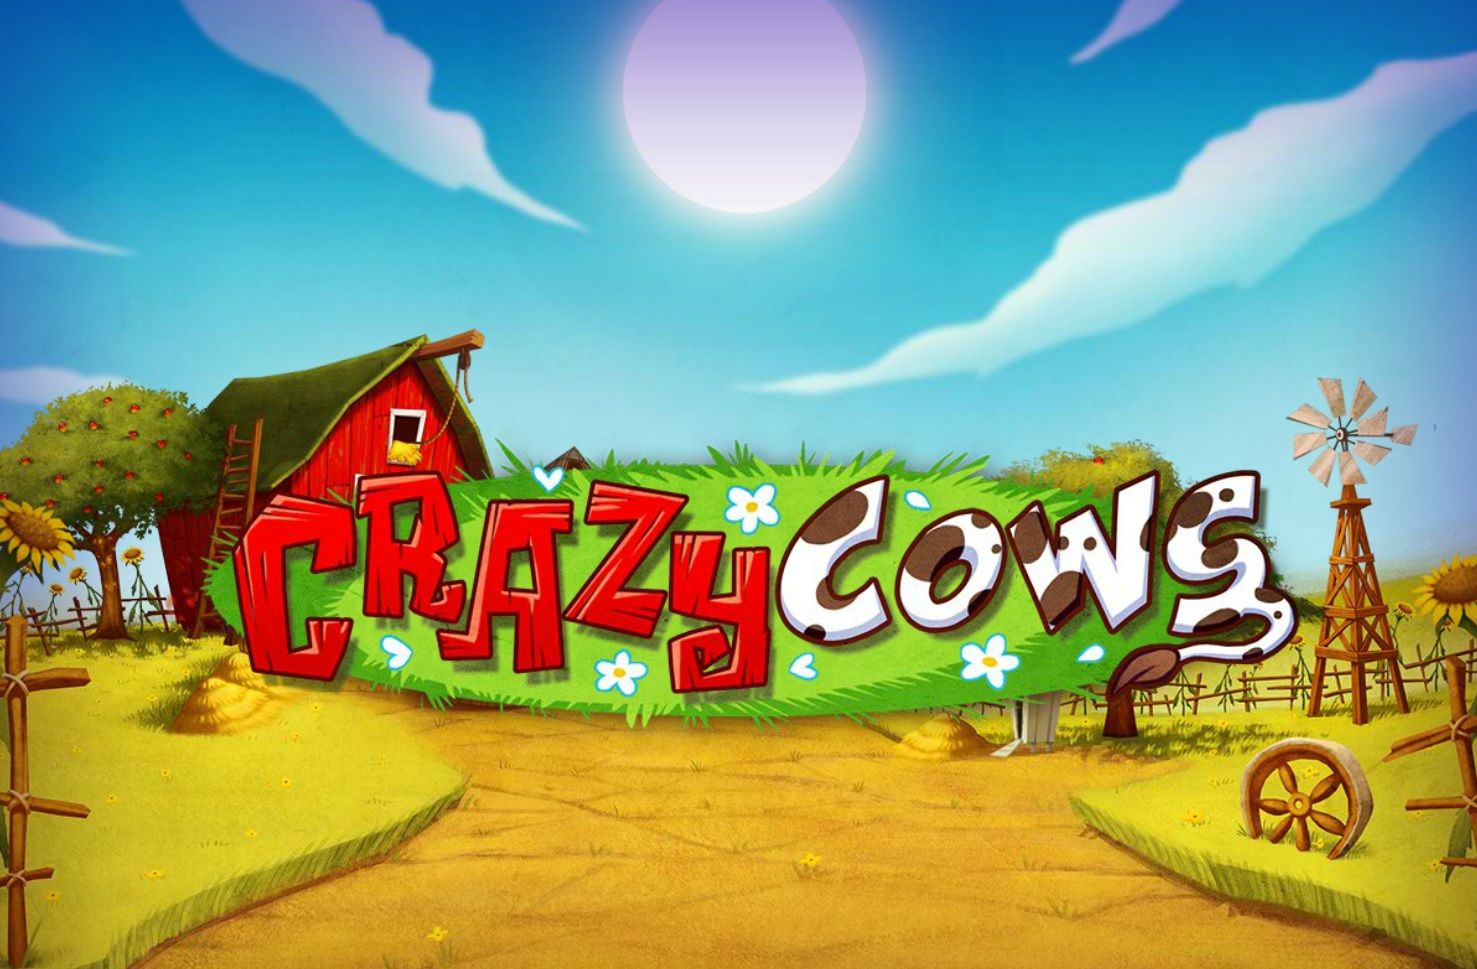 Crazy Cows Online Slot Game